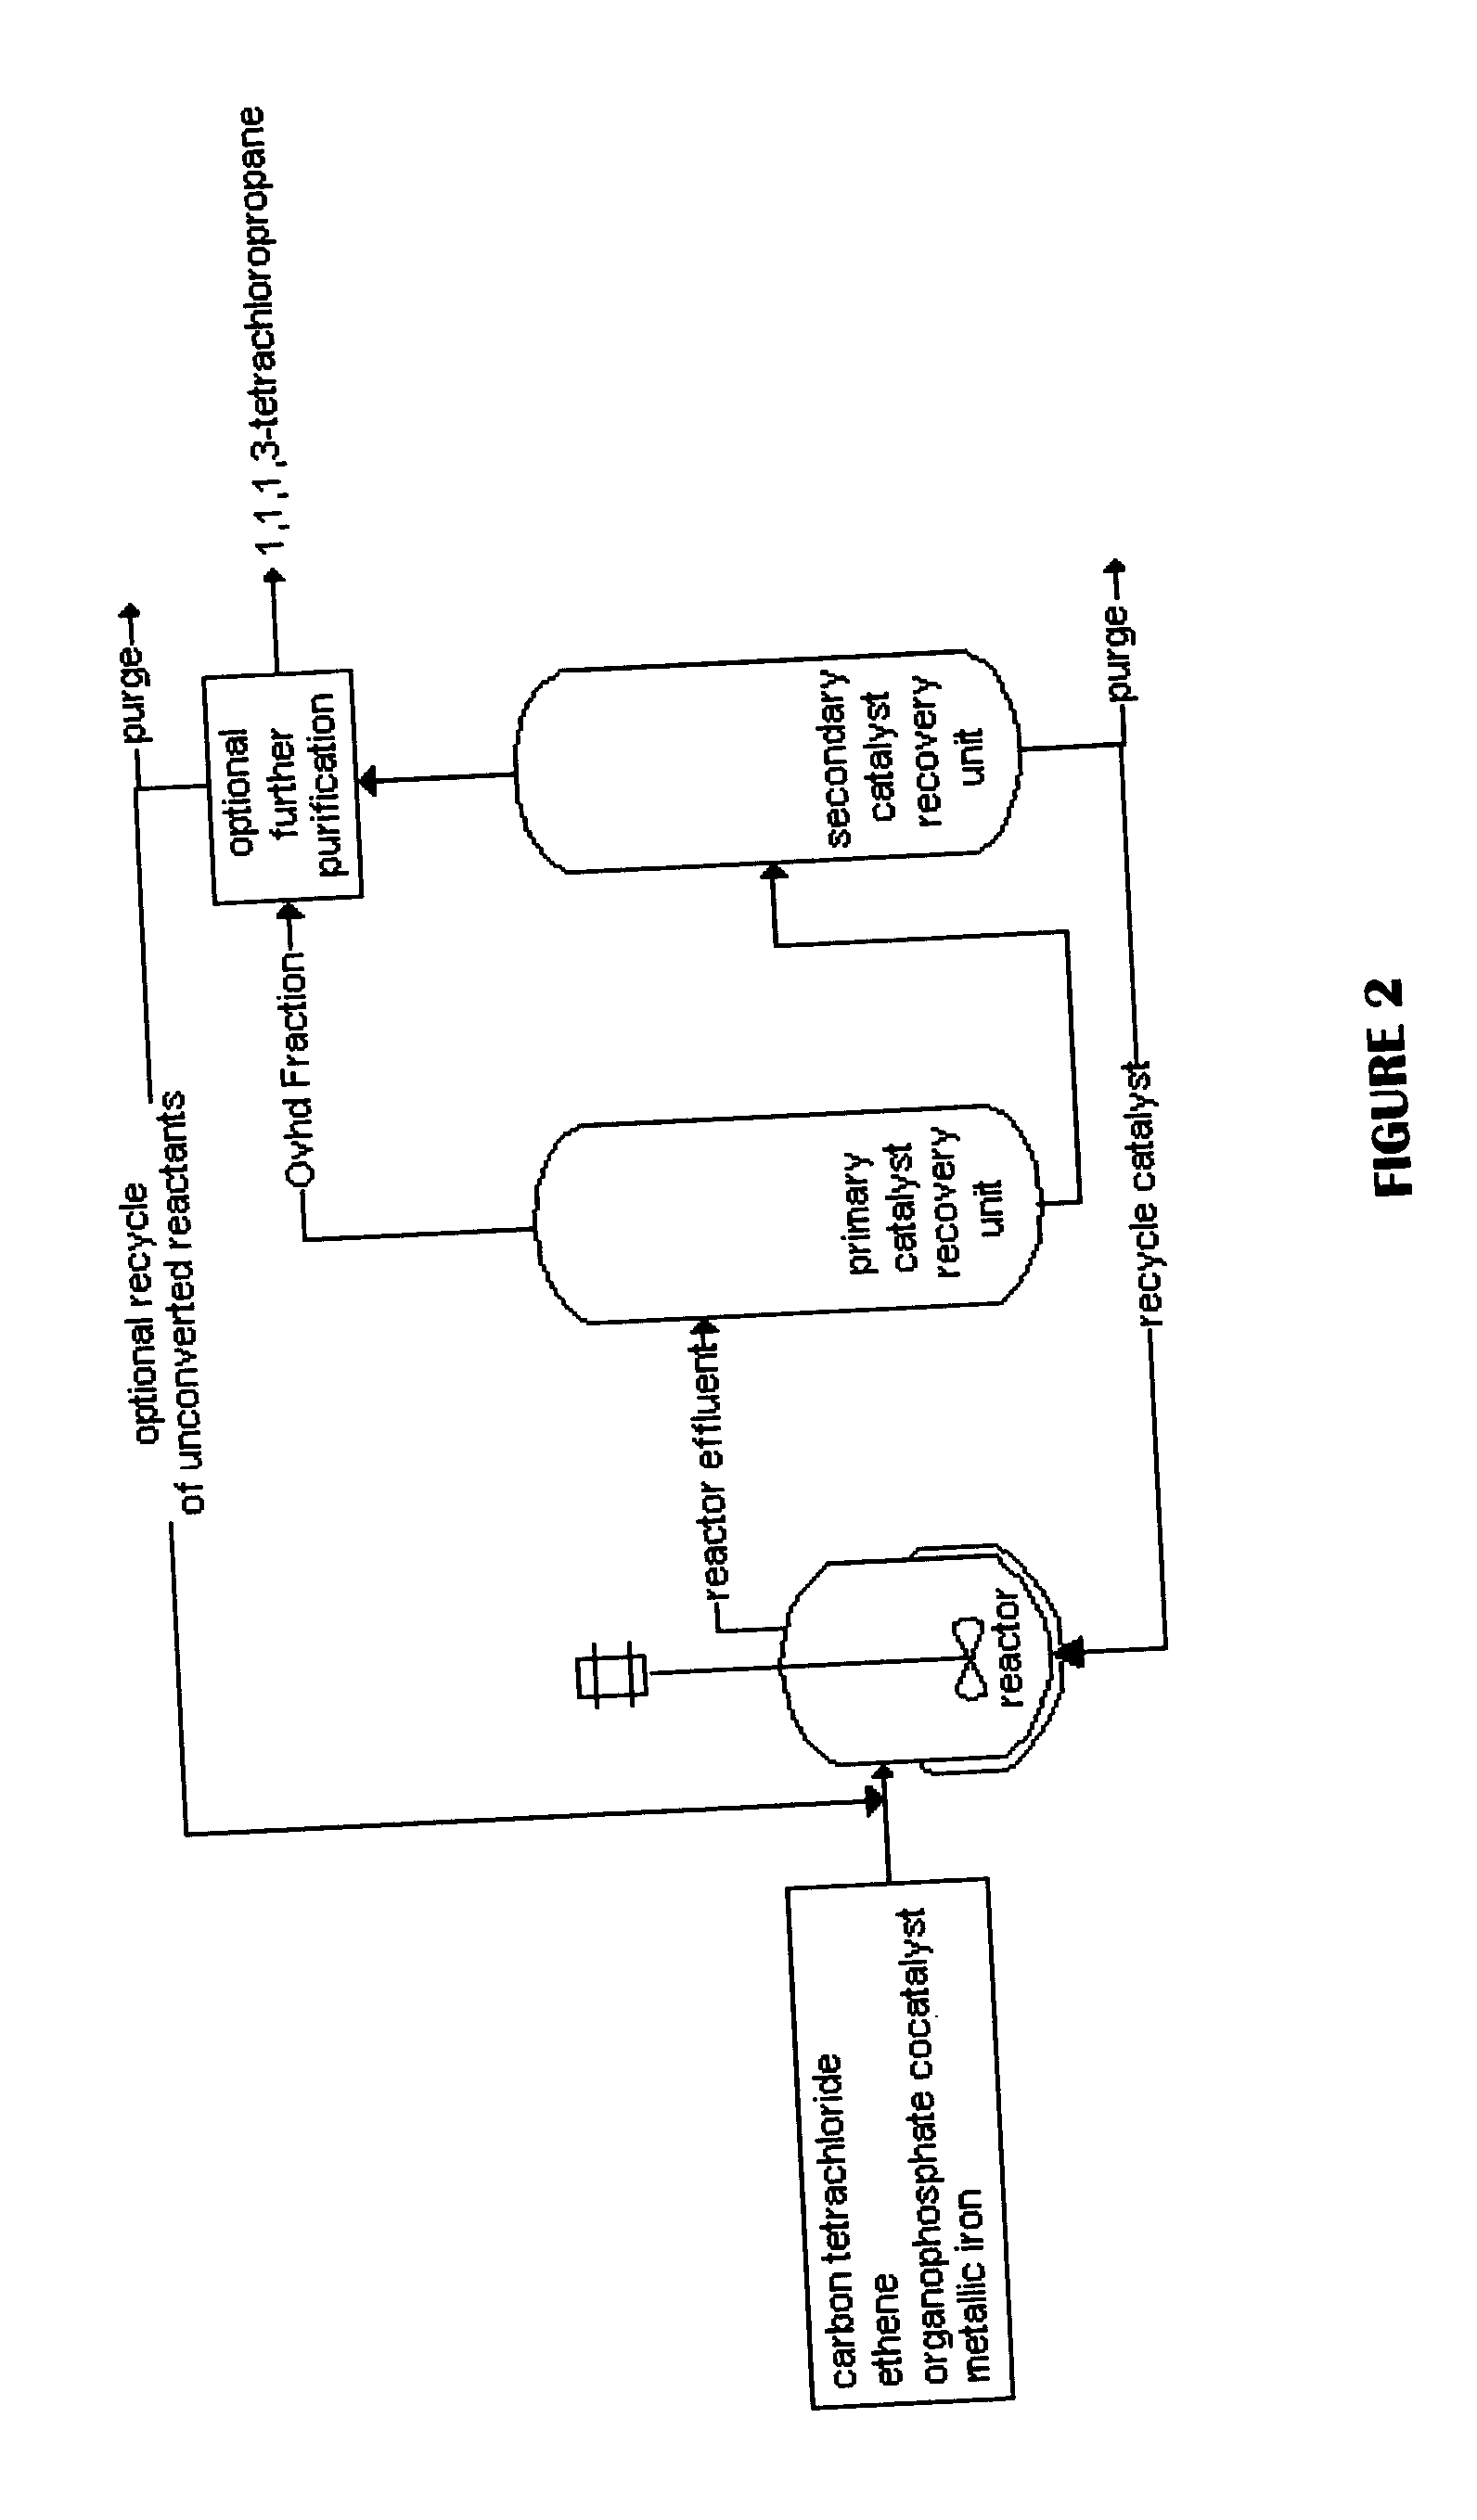 Method for producing 1,1,1,3-tetrachloropropane and other haloalkanes with iron catalyst